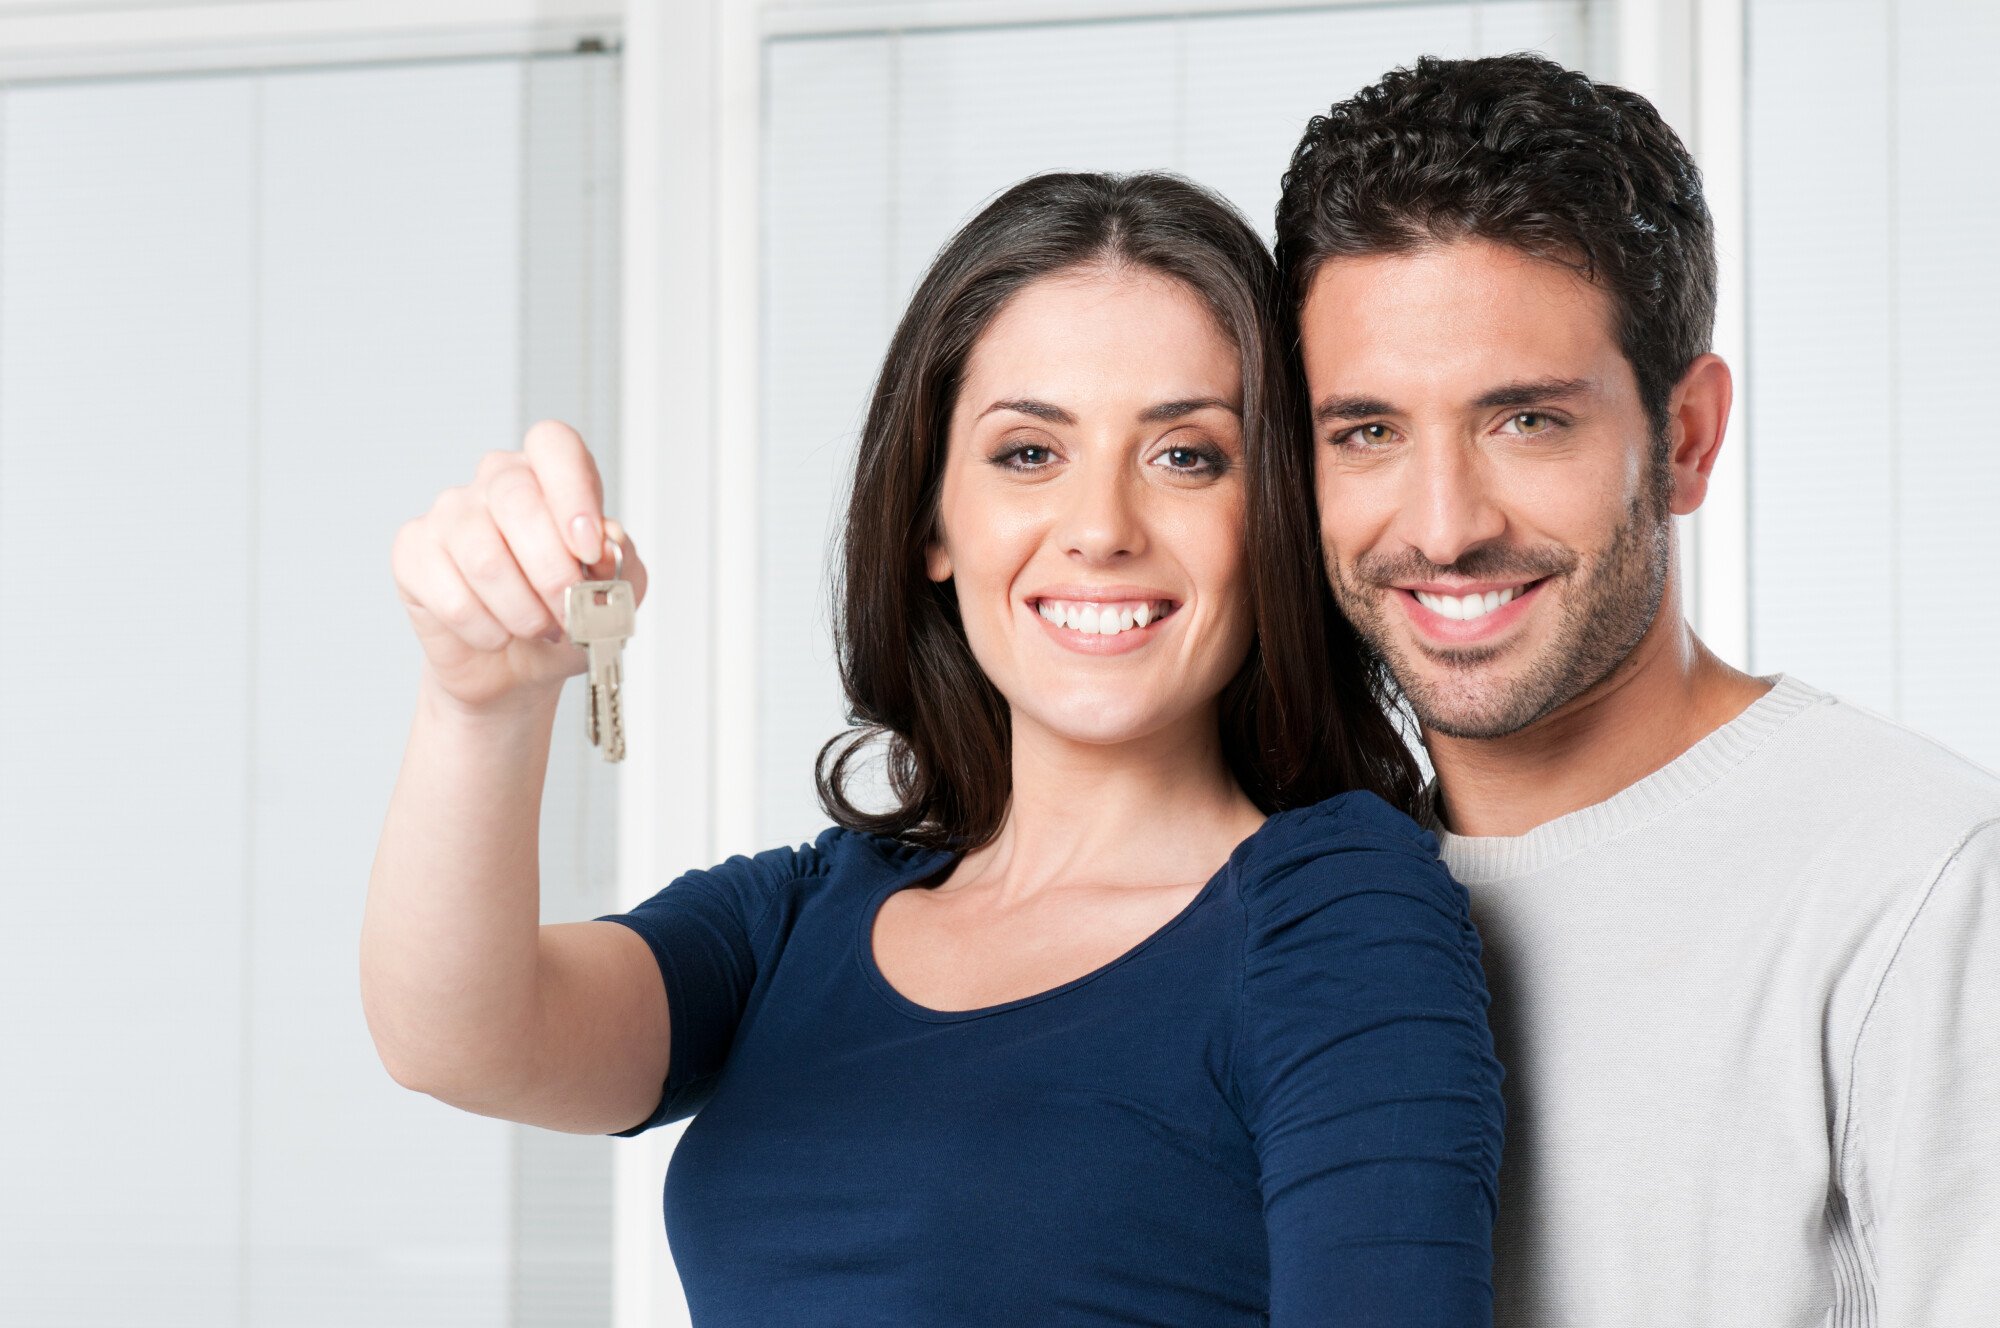 Listing Your Home for Rent: A Step-by-Step Guide for Largo, FL Property Owners